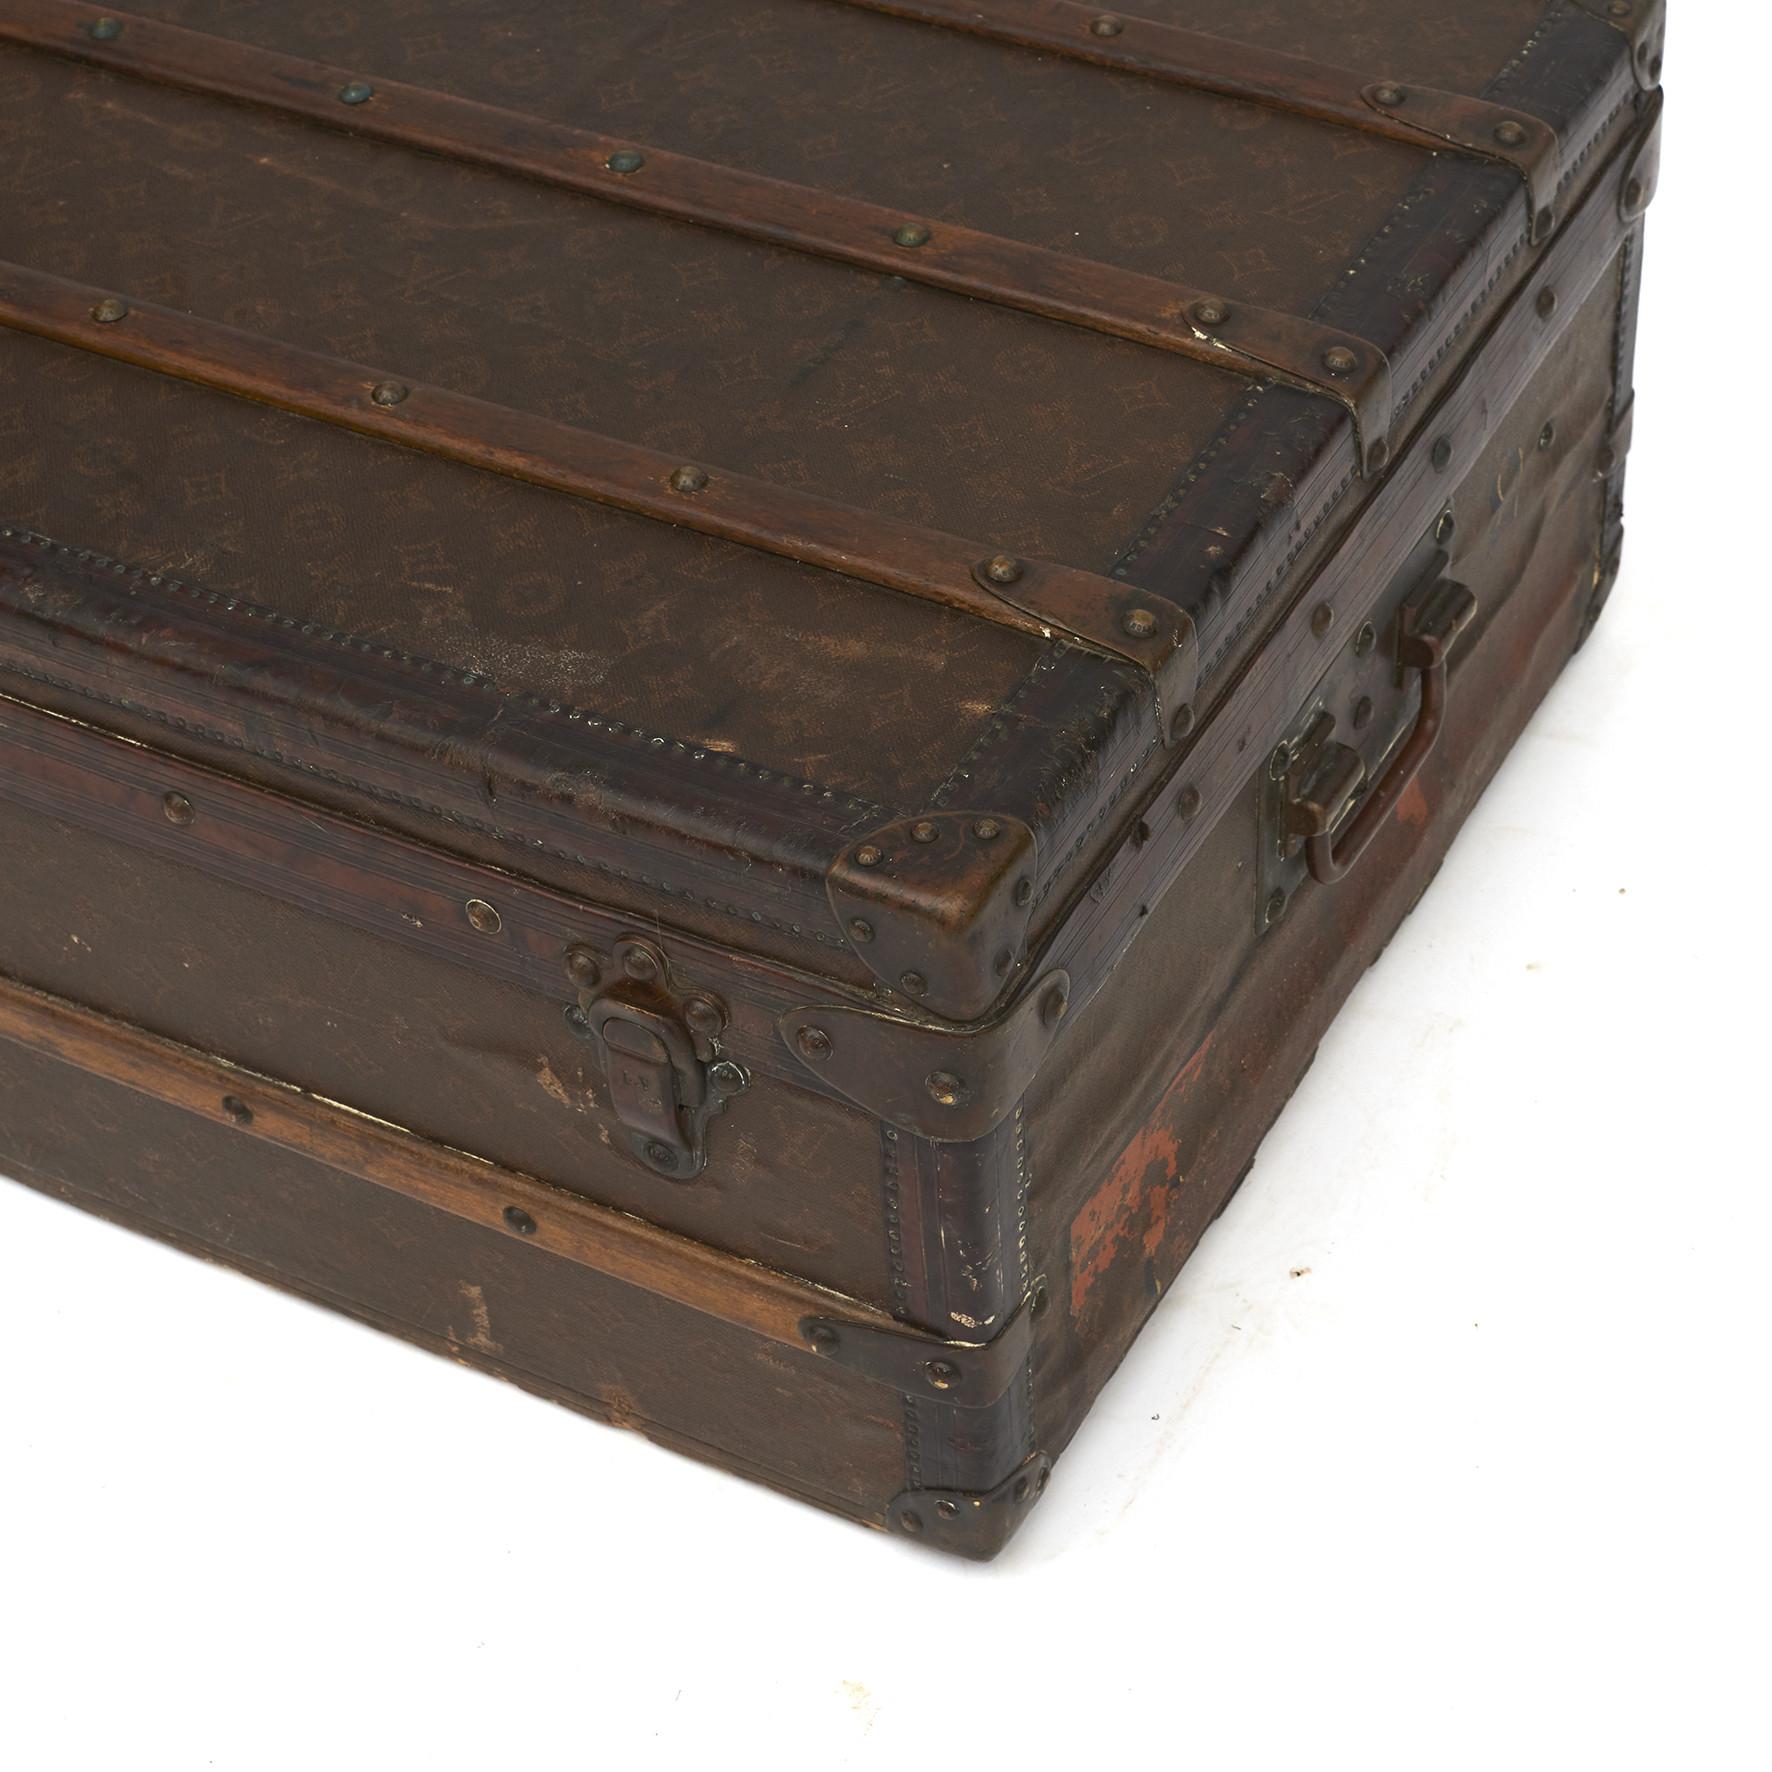 Louis Vuitton suitcase. In original untouched condition with a nice age-related patina.
Provenance: Emil Viktor Langlet, 1824-1898. Spetebyhall.
Emil Langlet was a well-known Swedish architect.
All things considered this trunk was presumably